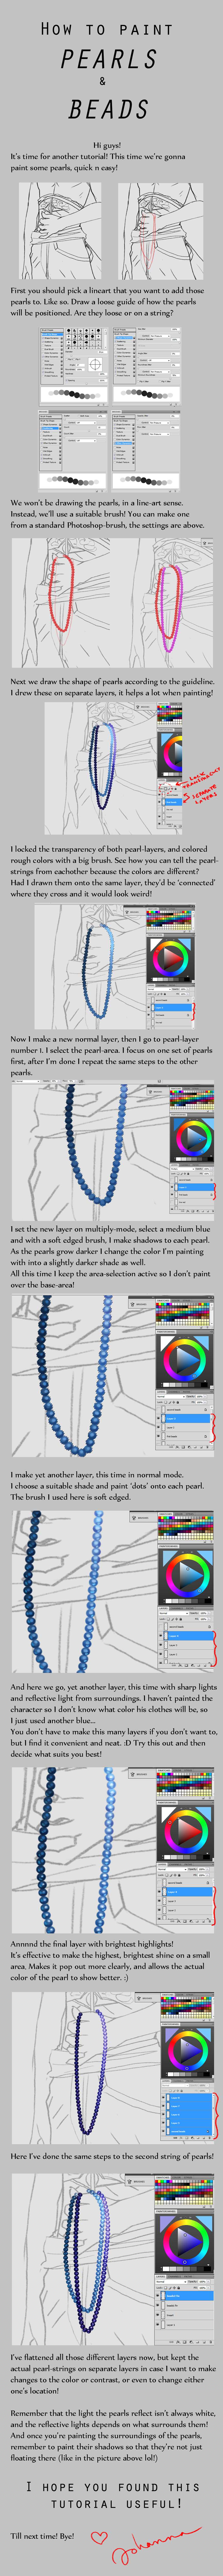 How to paint Pearls